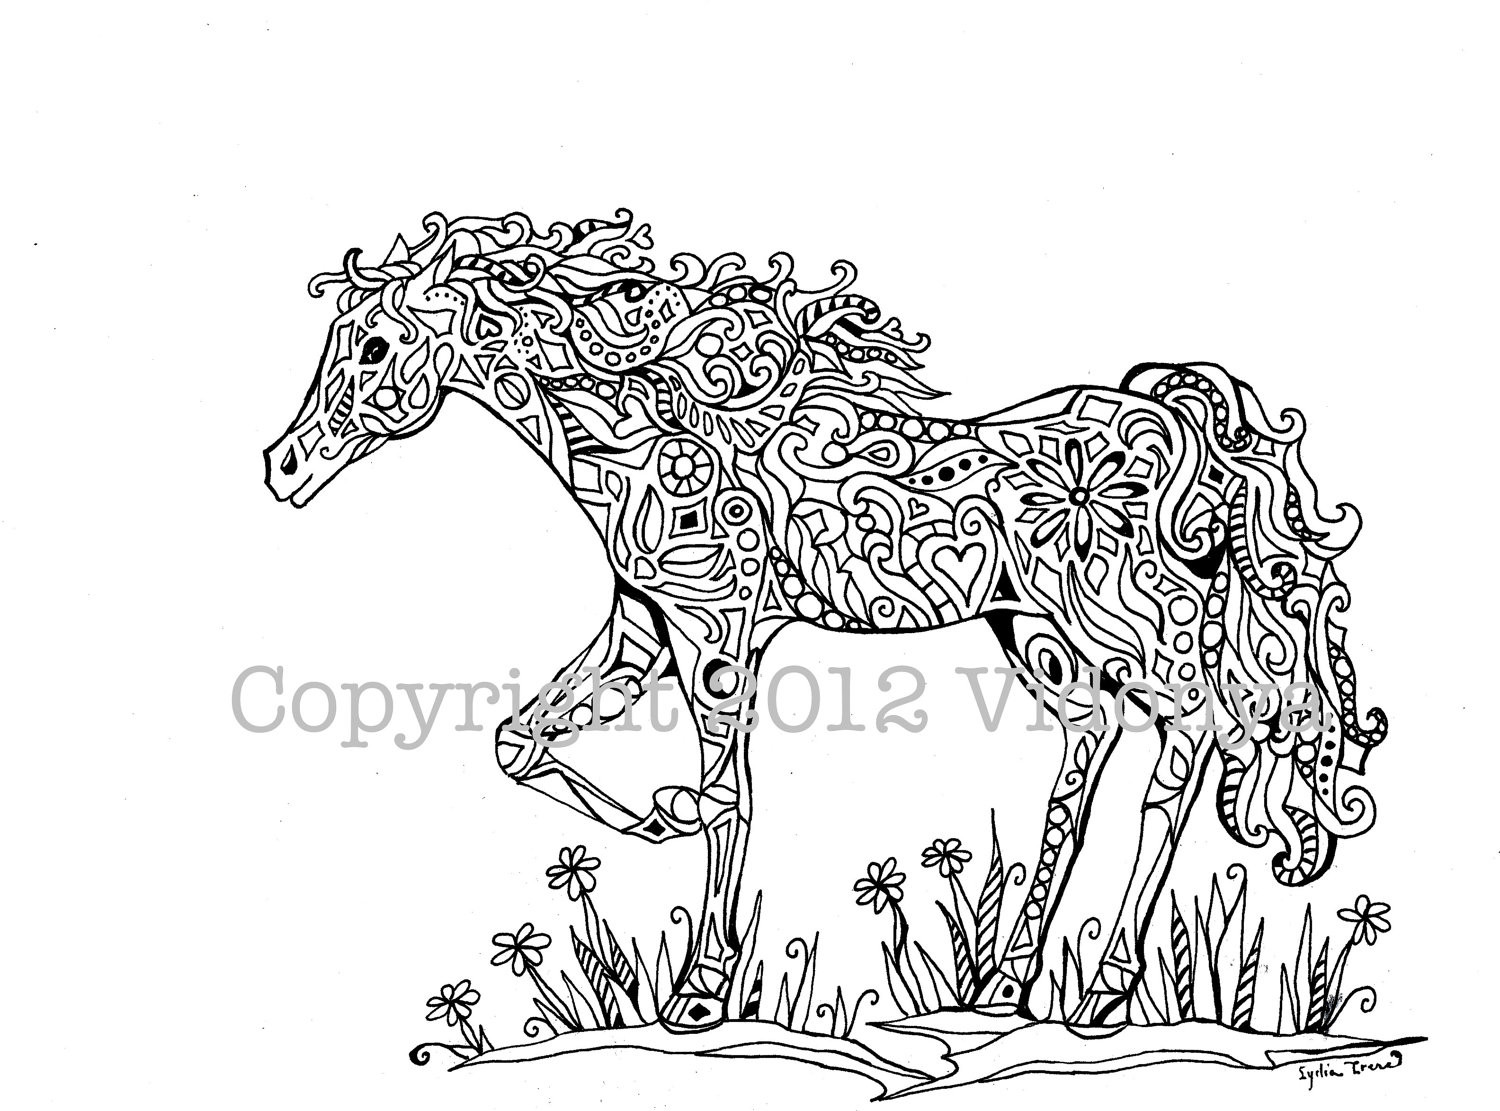 Coloring Pages For Adults Horses
 Horse coloring page from Vidonya on Etsy